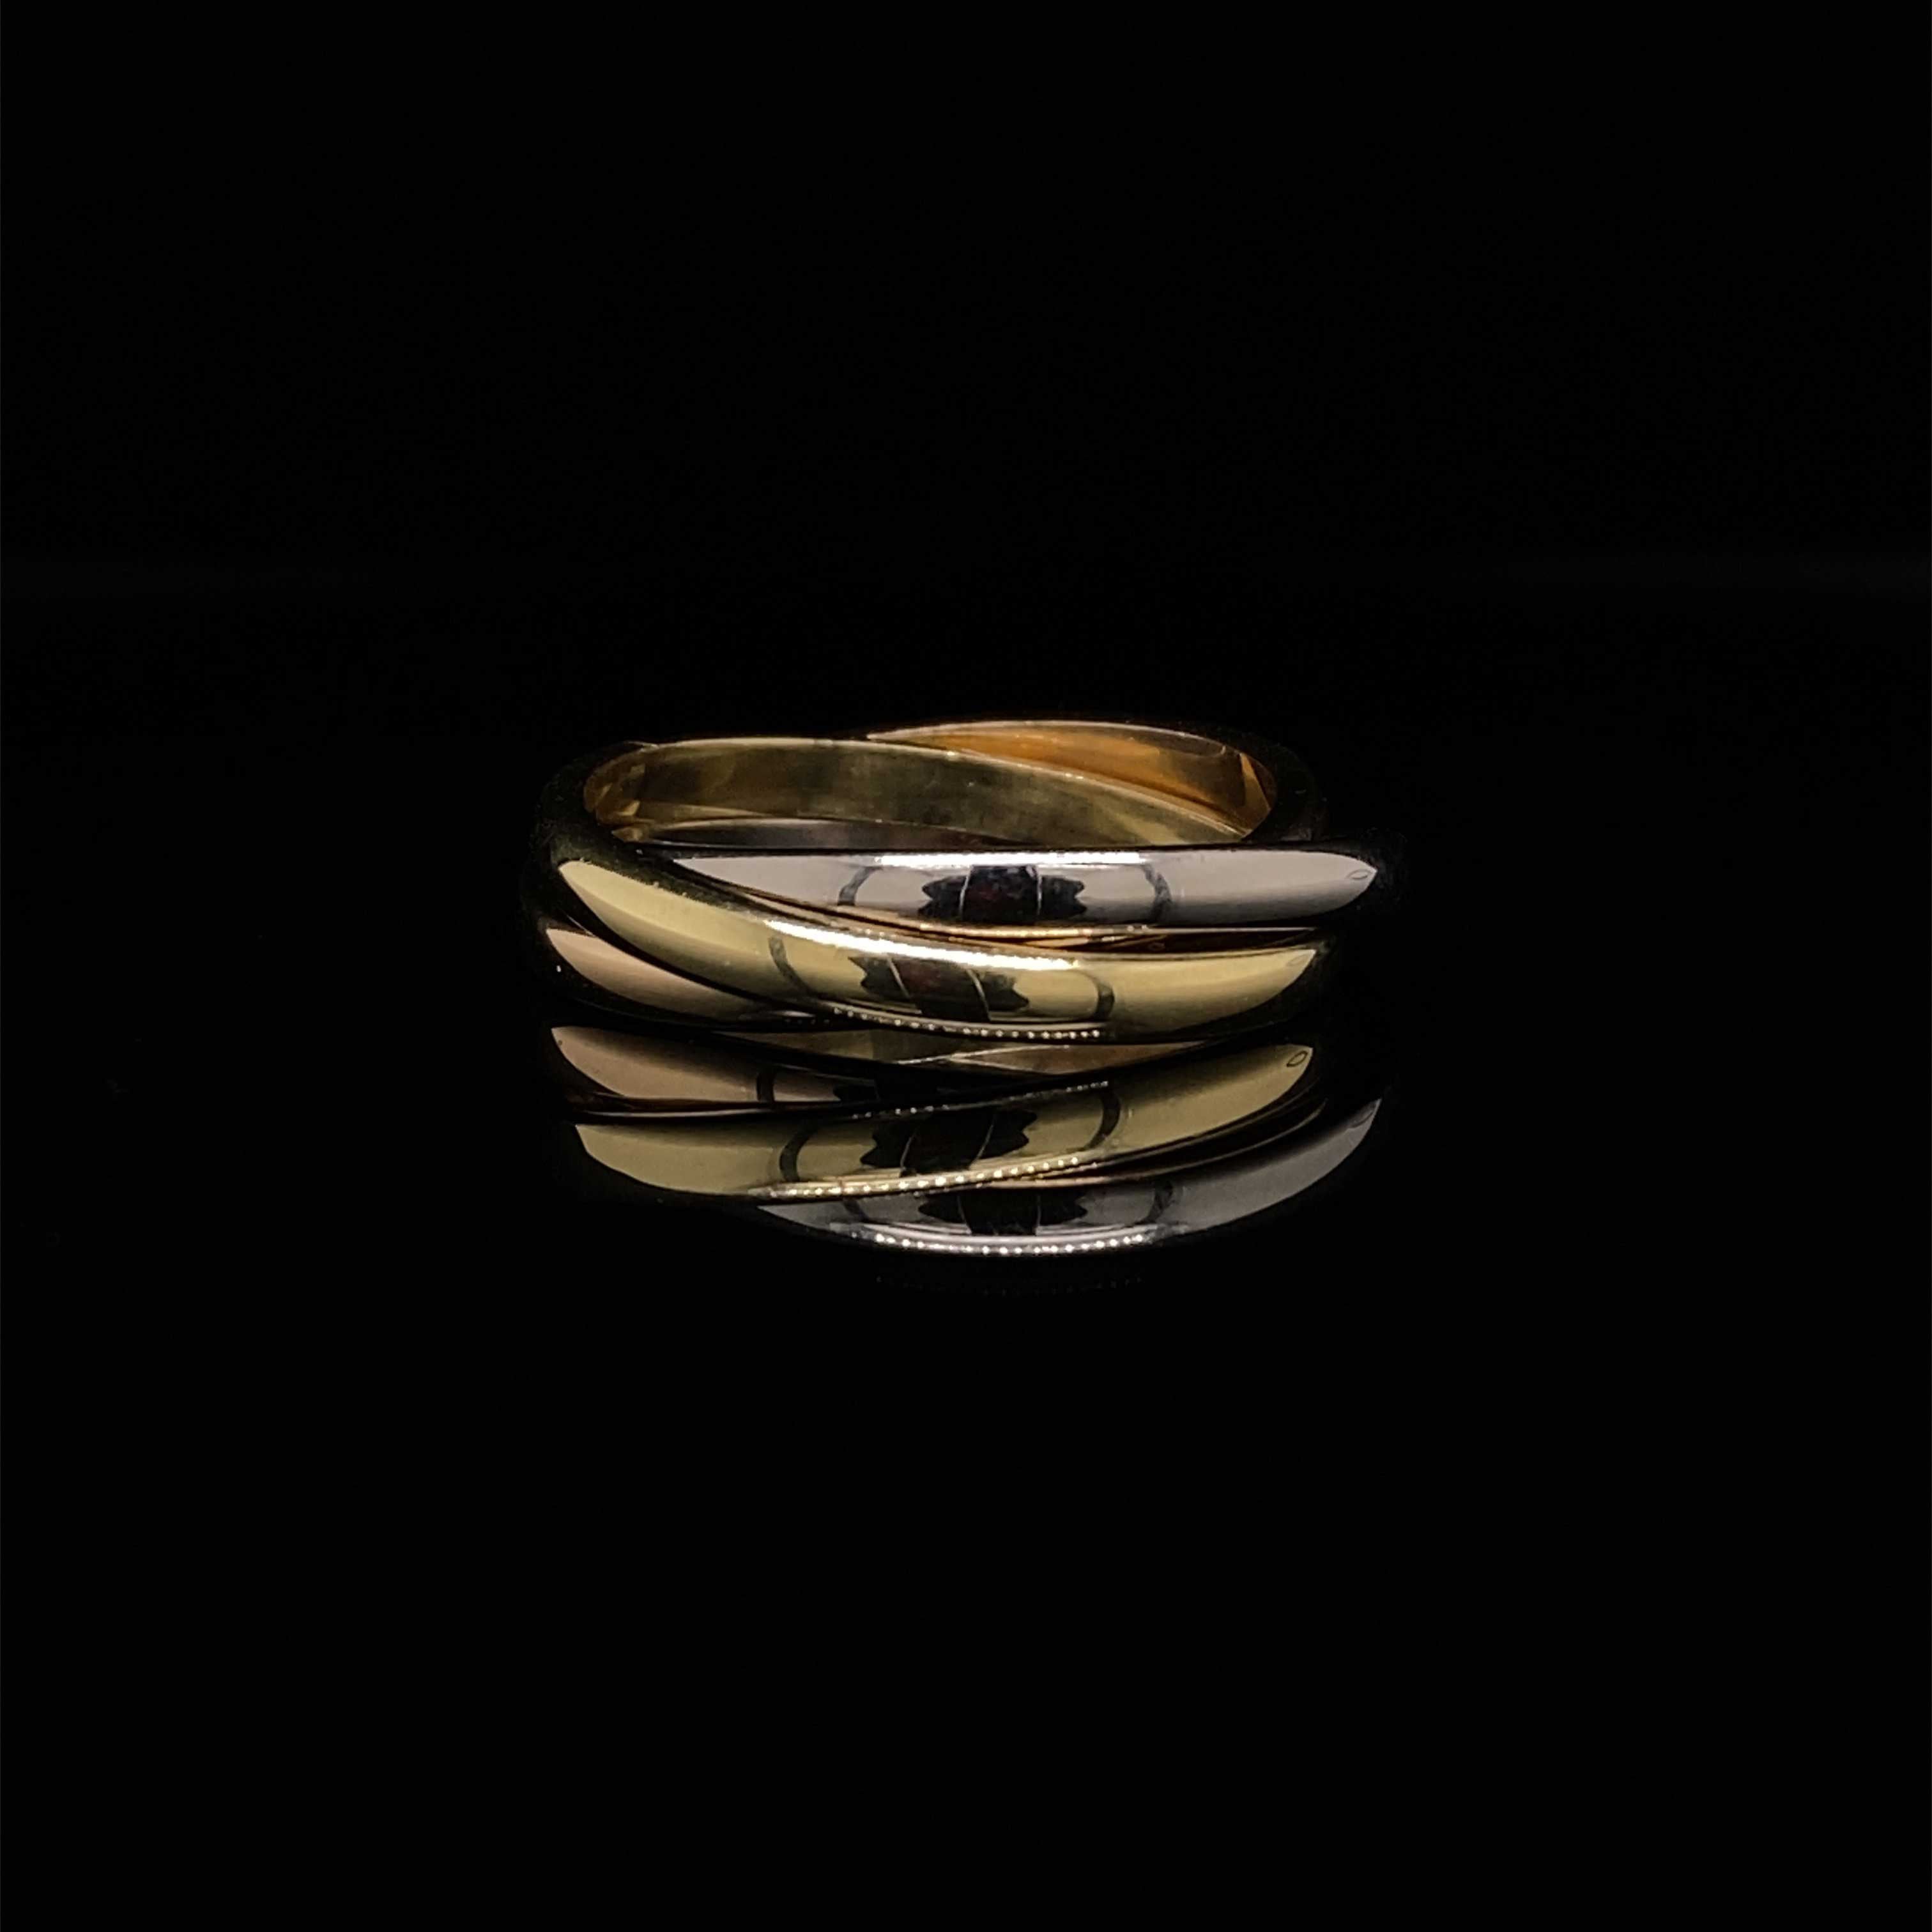 Russian Wedding Ring made from 3 x Titanium Bands | Titan Jewellery